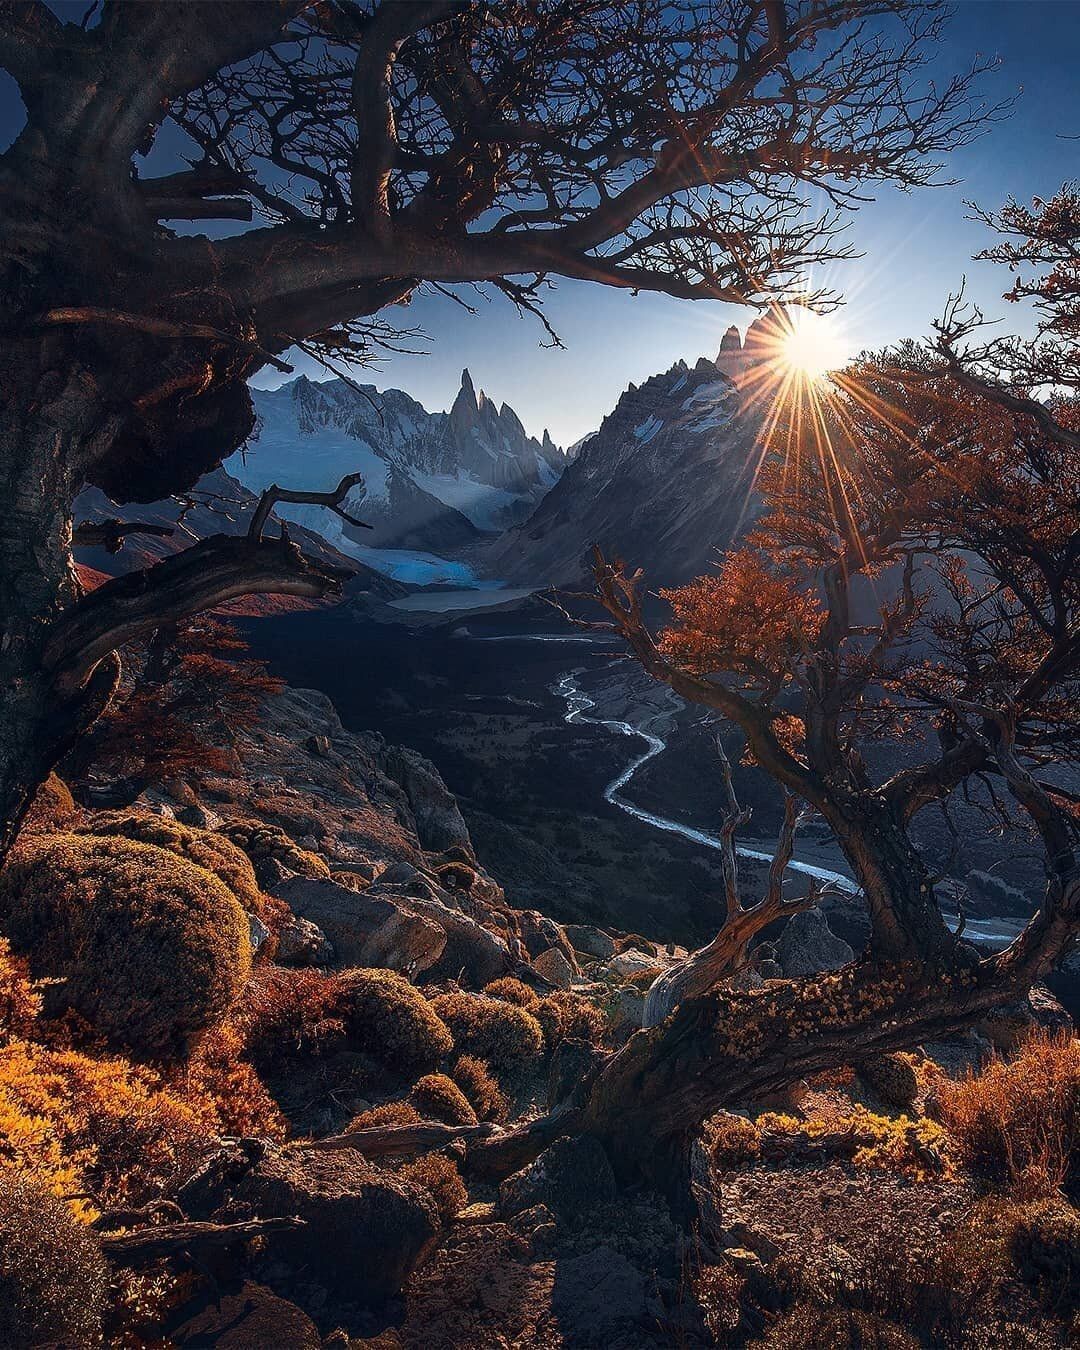 A sunburst shines through a tree in front of a mountain range - Photography